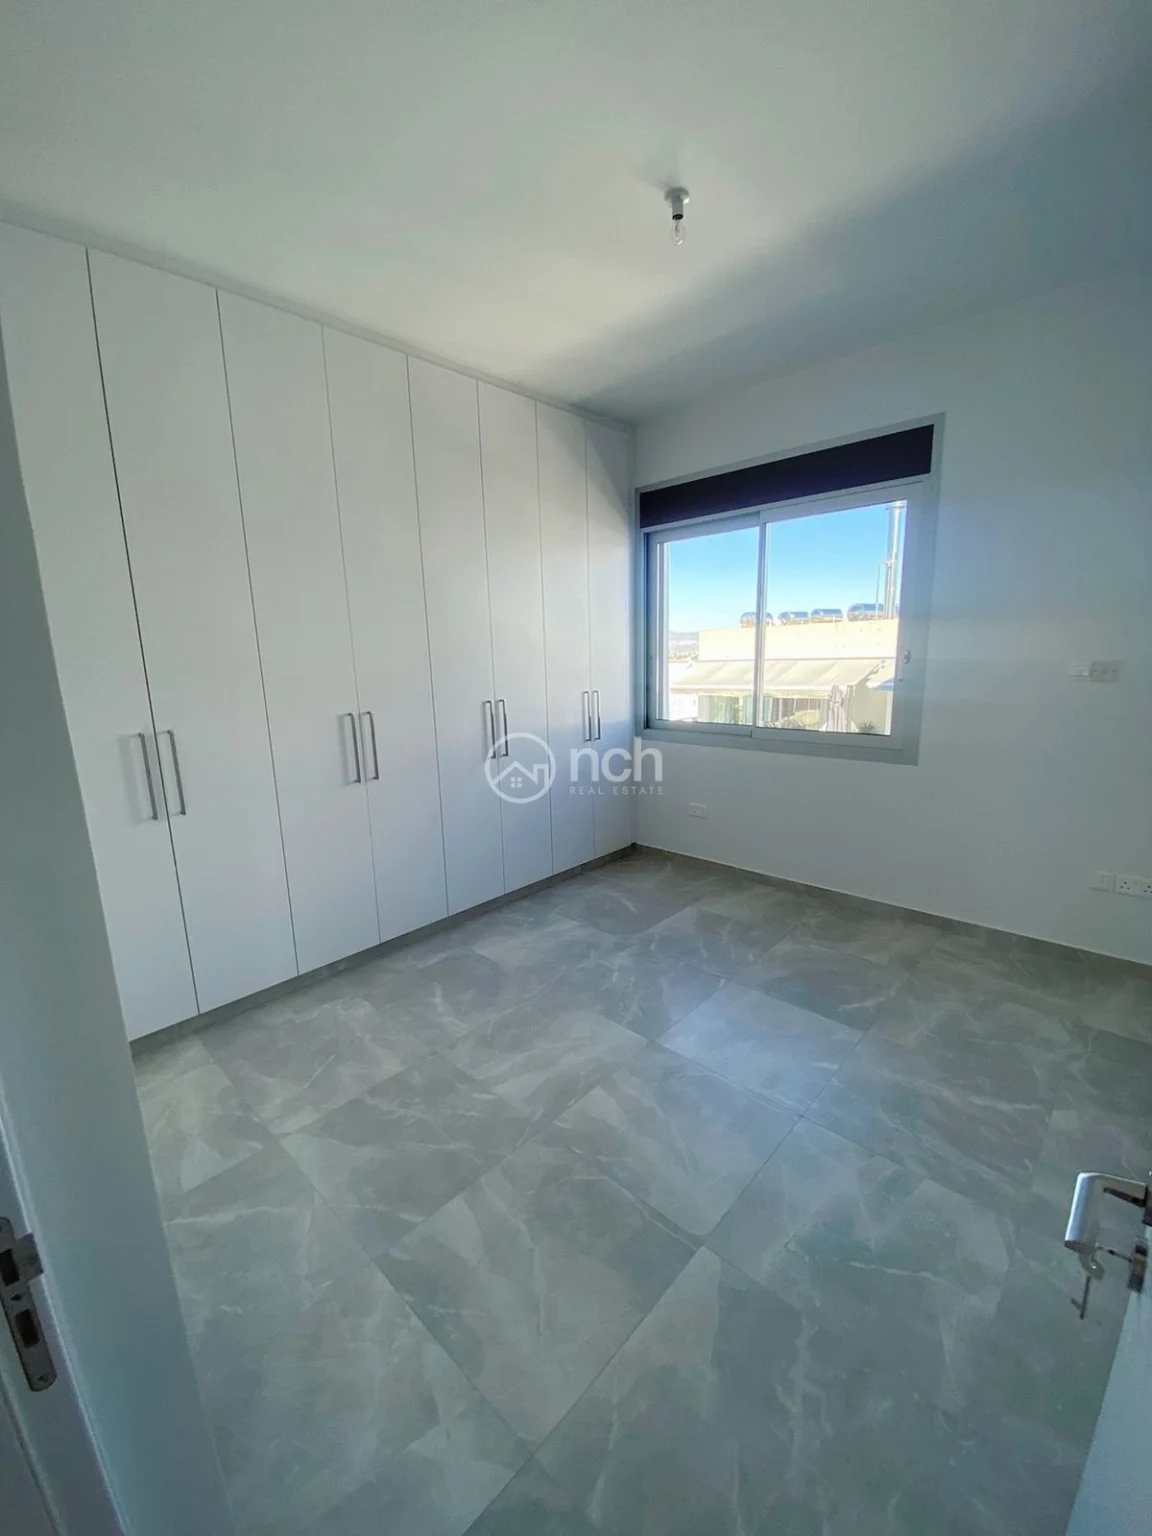 3 Bedroom Apartment for Rent in Strovolos – Archangelos, Nicosia District